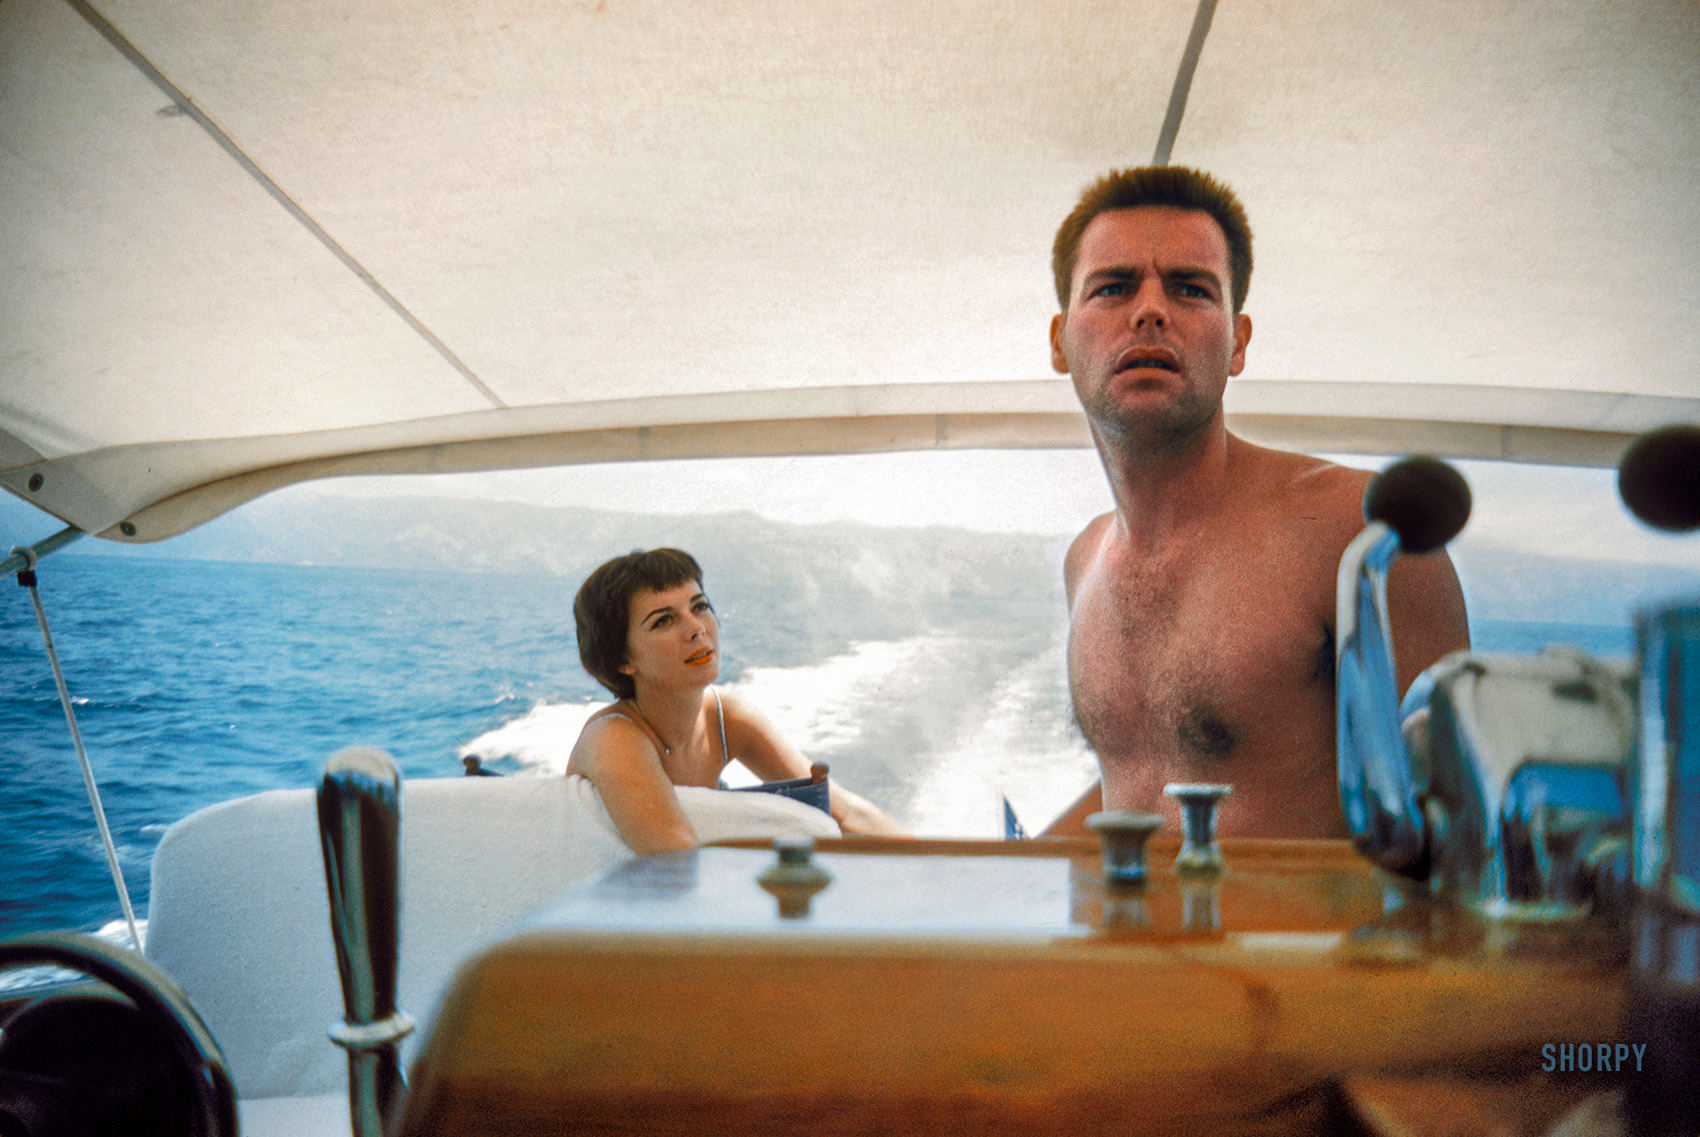 July 1958. "Actors Natalie Wood and Robert Wagner onboard their yacht off the California coast." 35mm Kodachrome from photos by Robert Vose for the Look magazine assignment "Natalie Wood: Beauty and Violence." View full size.